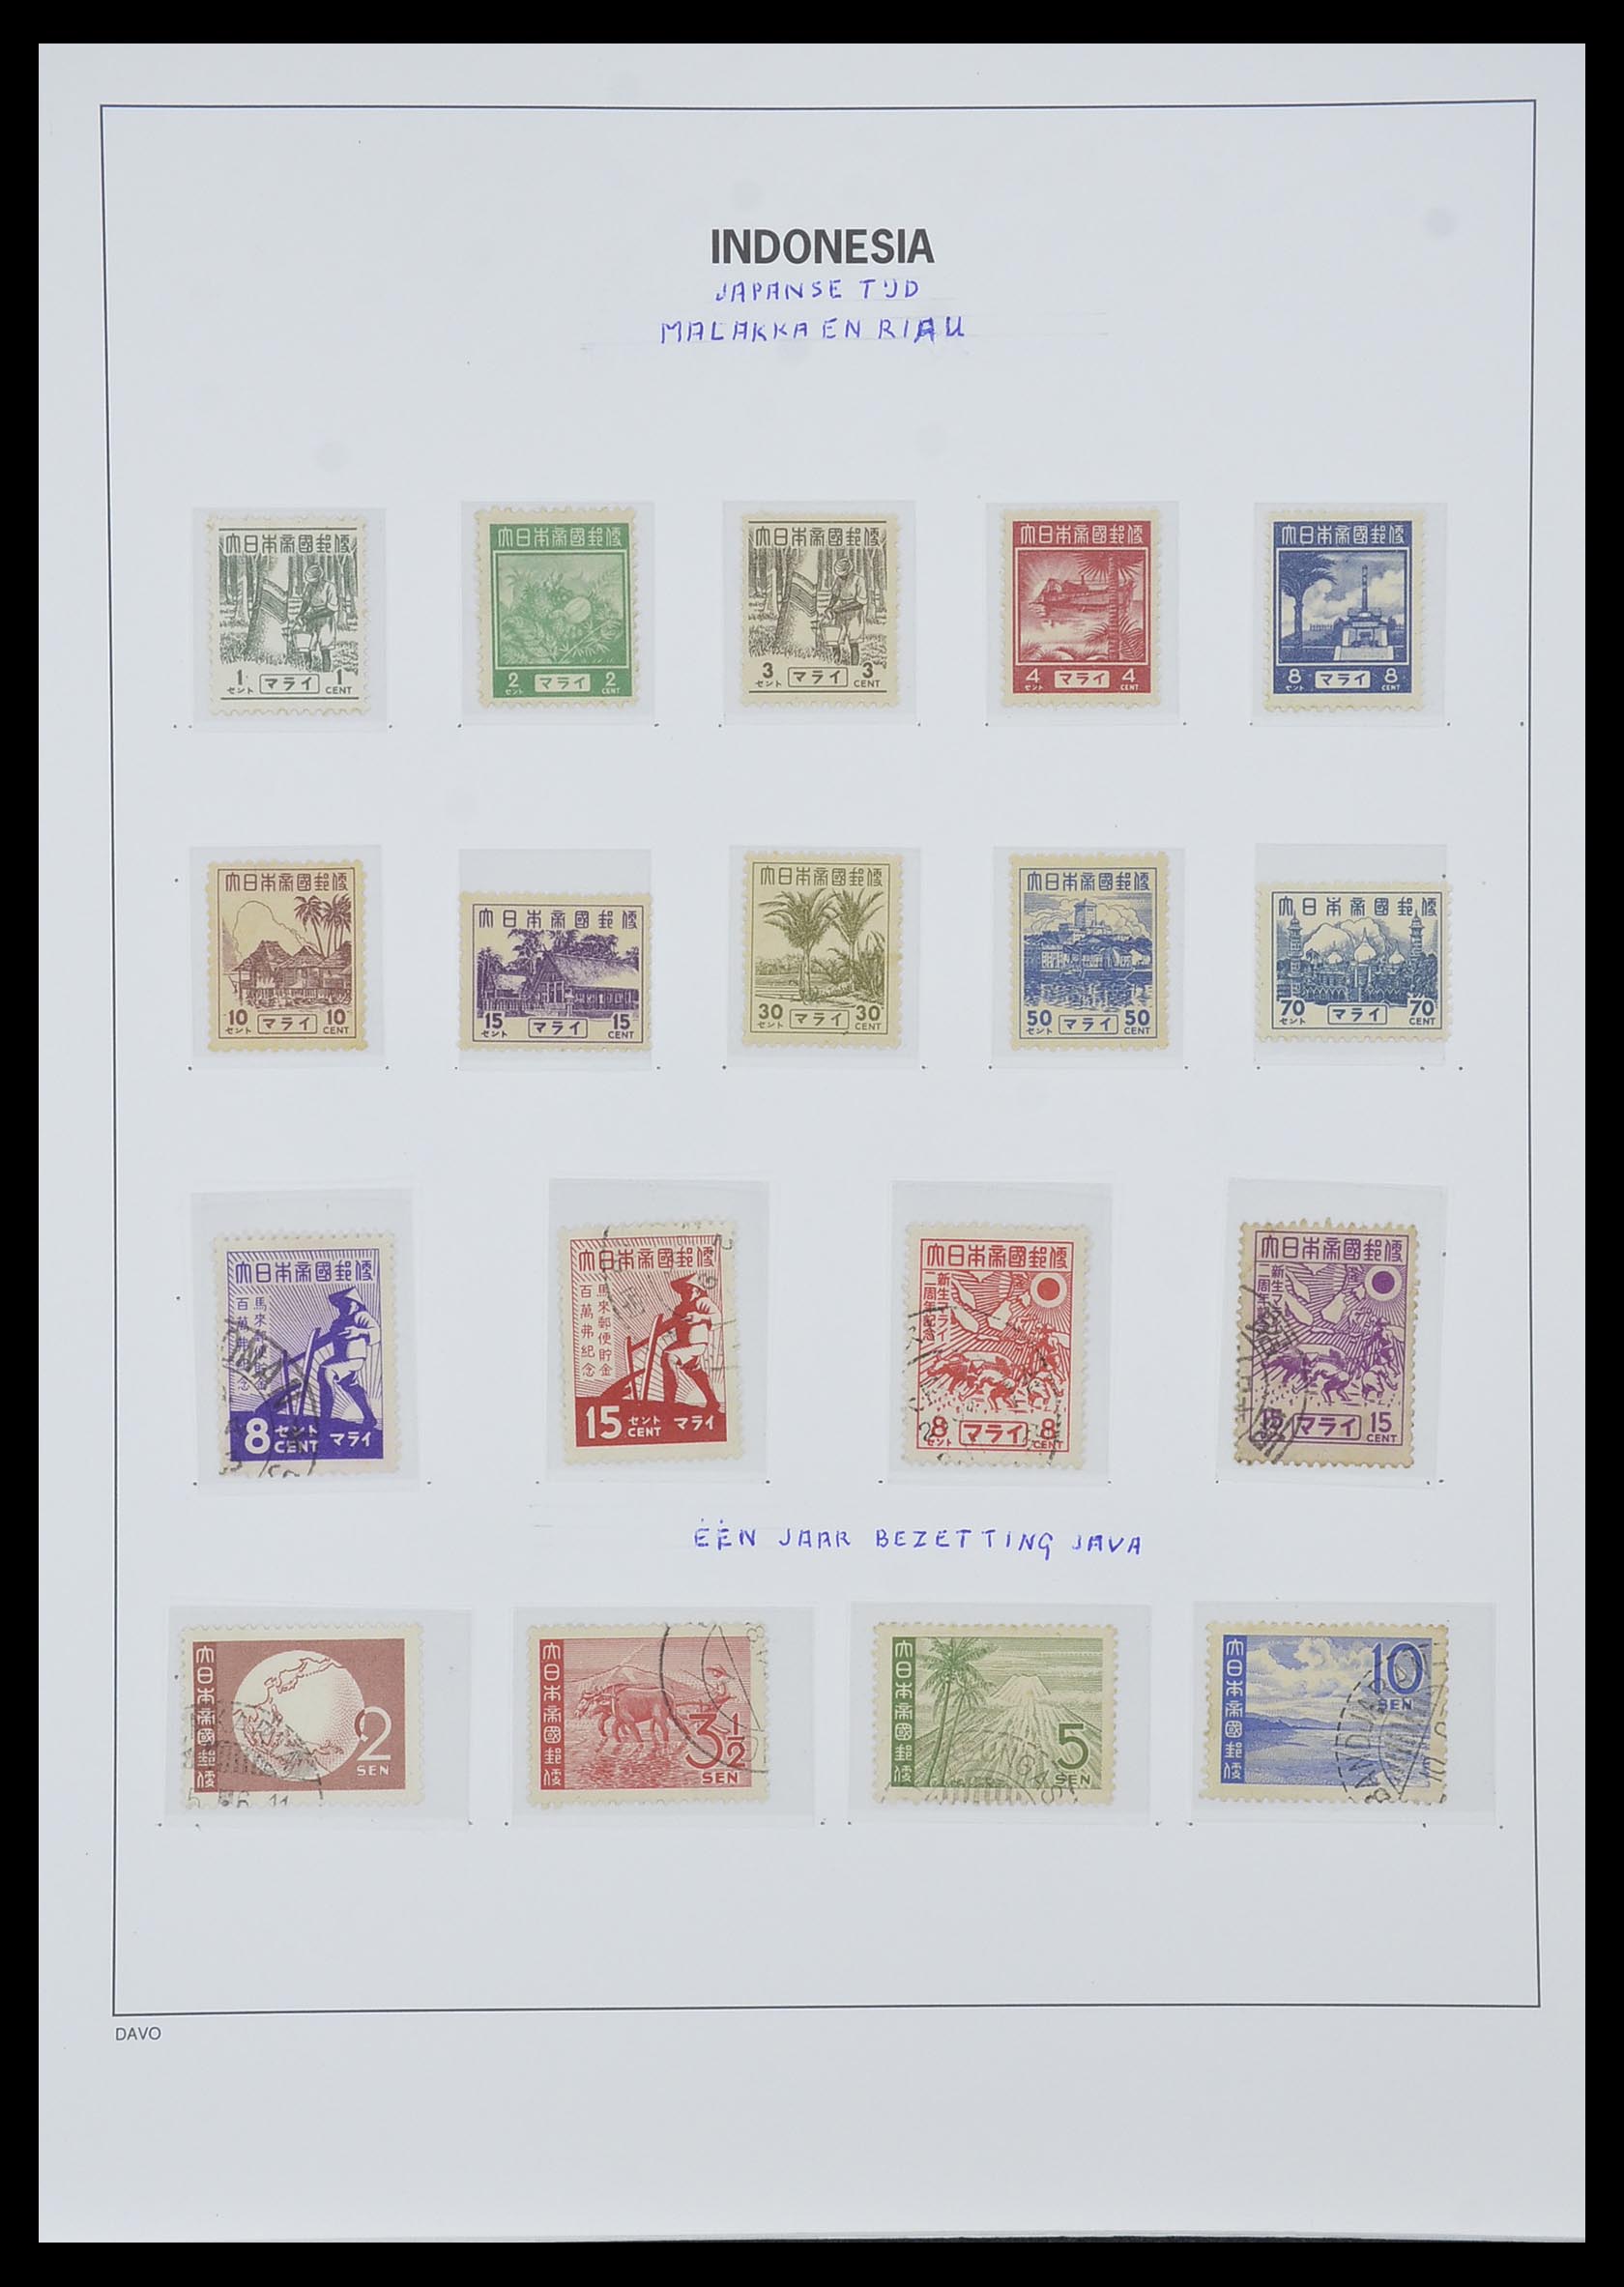 33988 004 - Stamp collection 33988 Vienna printings Indonesia.